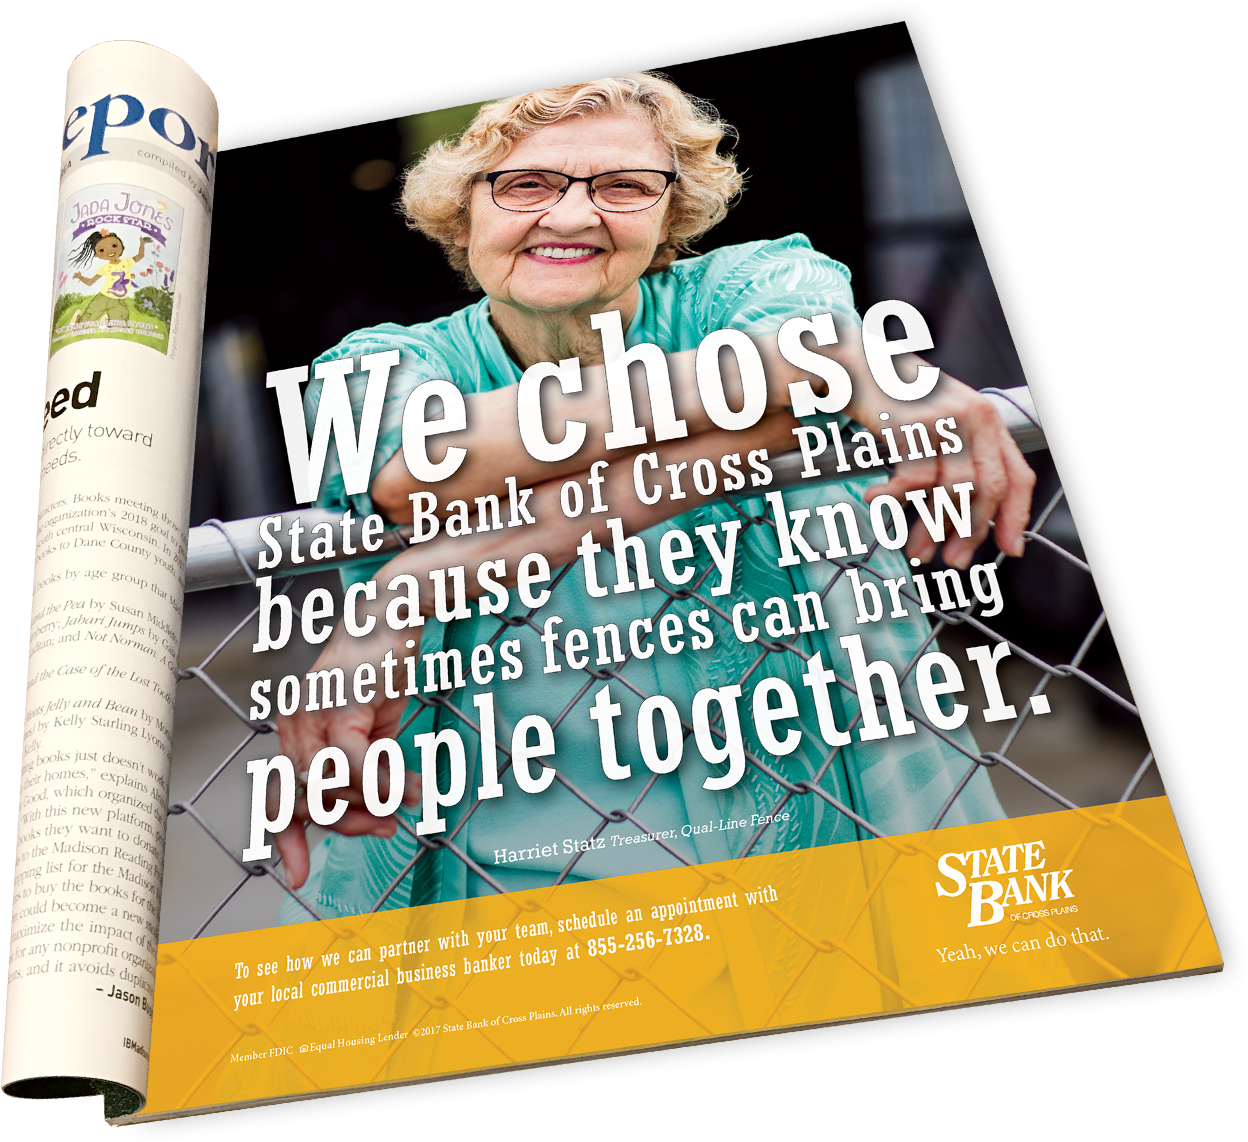 State Bank of Cross Plains magazine ad: We chose State Bank of Cross Plains because they know sometimes fences can bring people together.